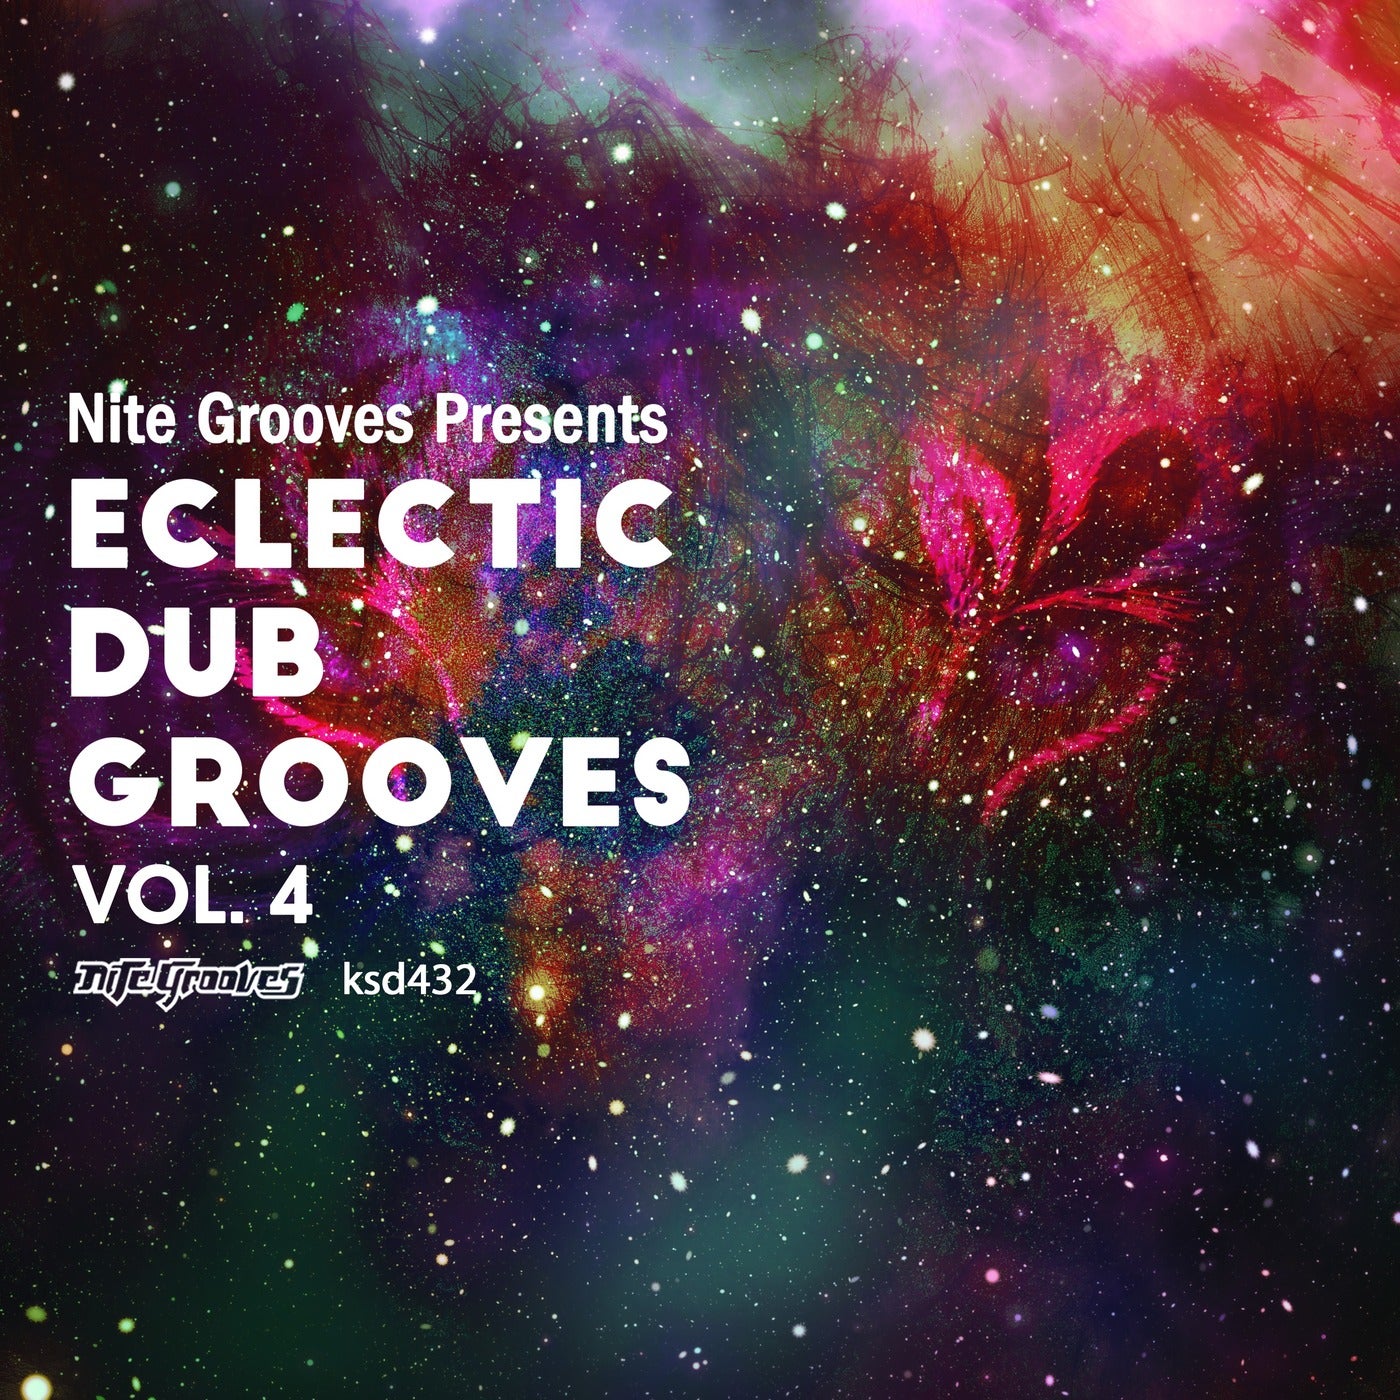 Download Nite Grooves Presents Eclectic Dub Grooves, Vol. 4 on Electrobuzz